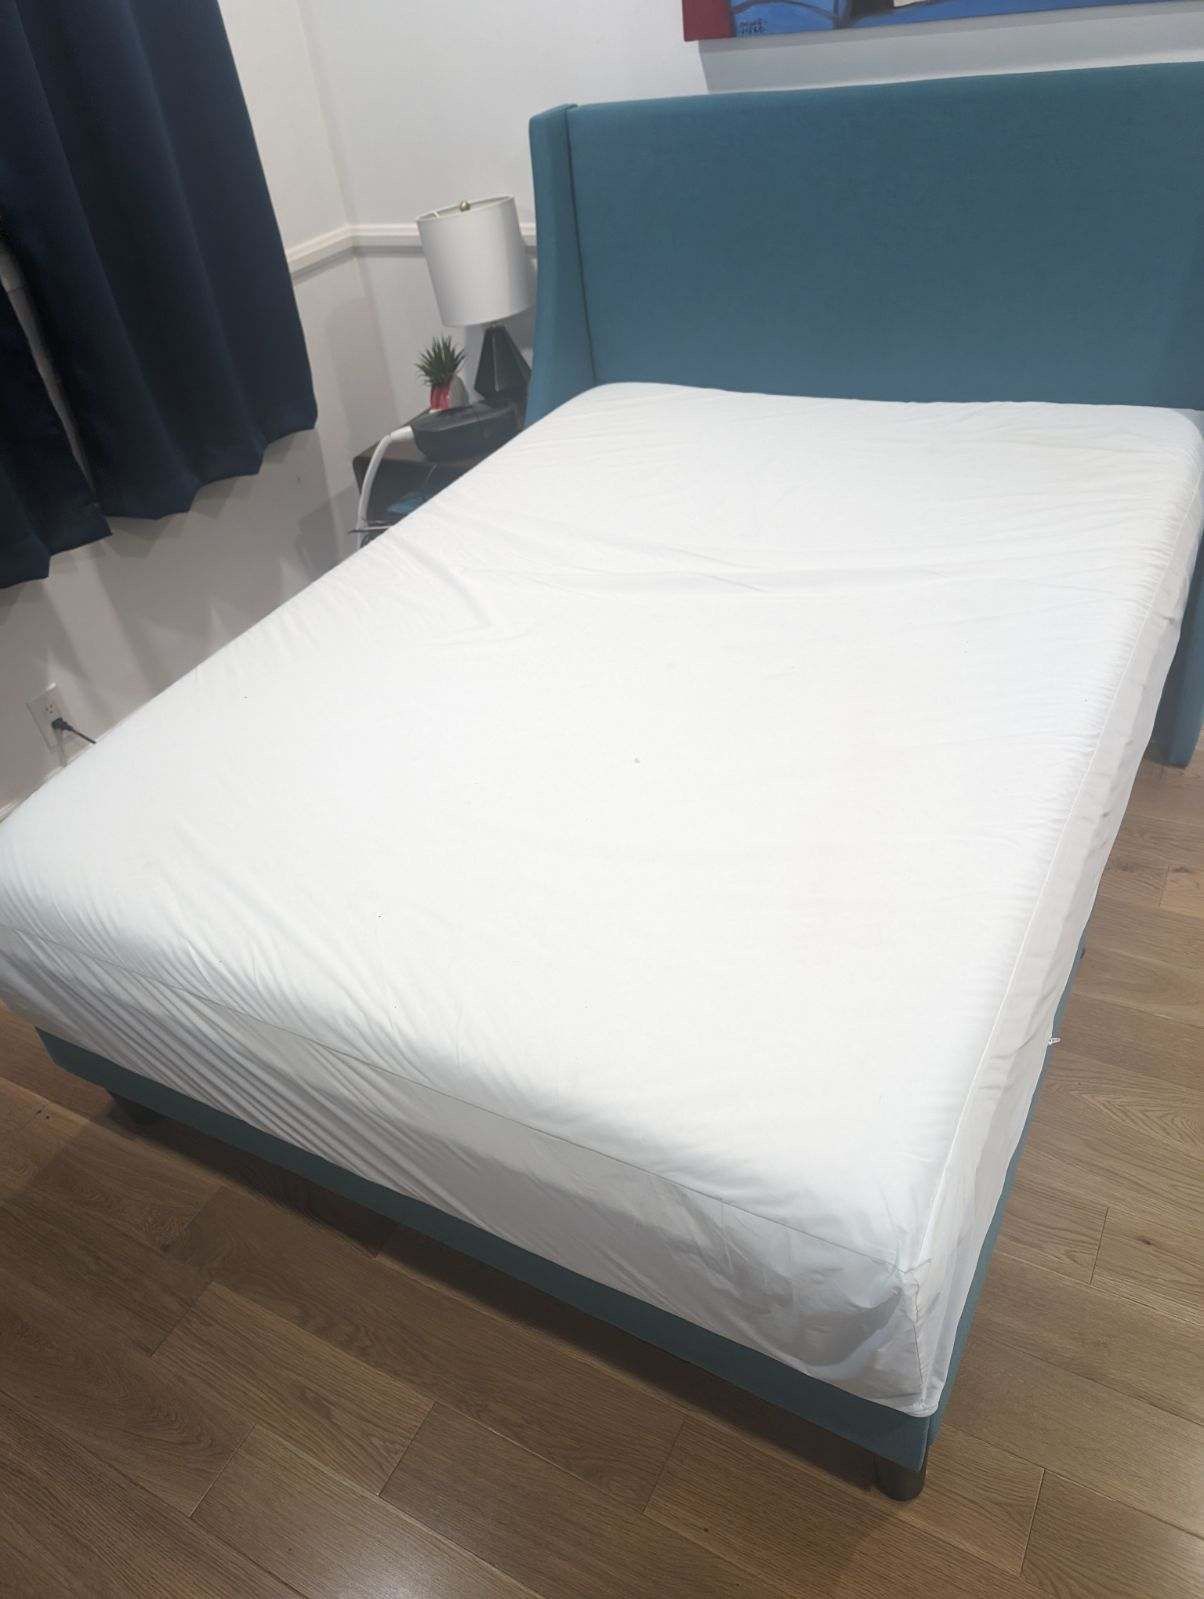 Full Size Mattress/ Mattress Cover And / And Full Size Bed Fran